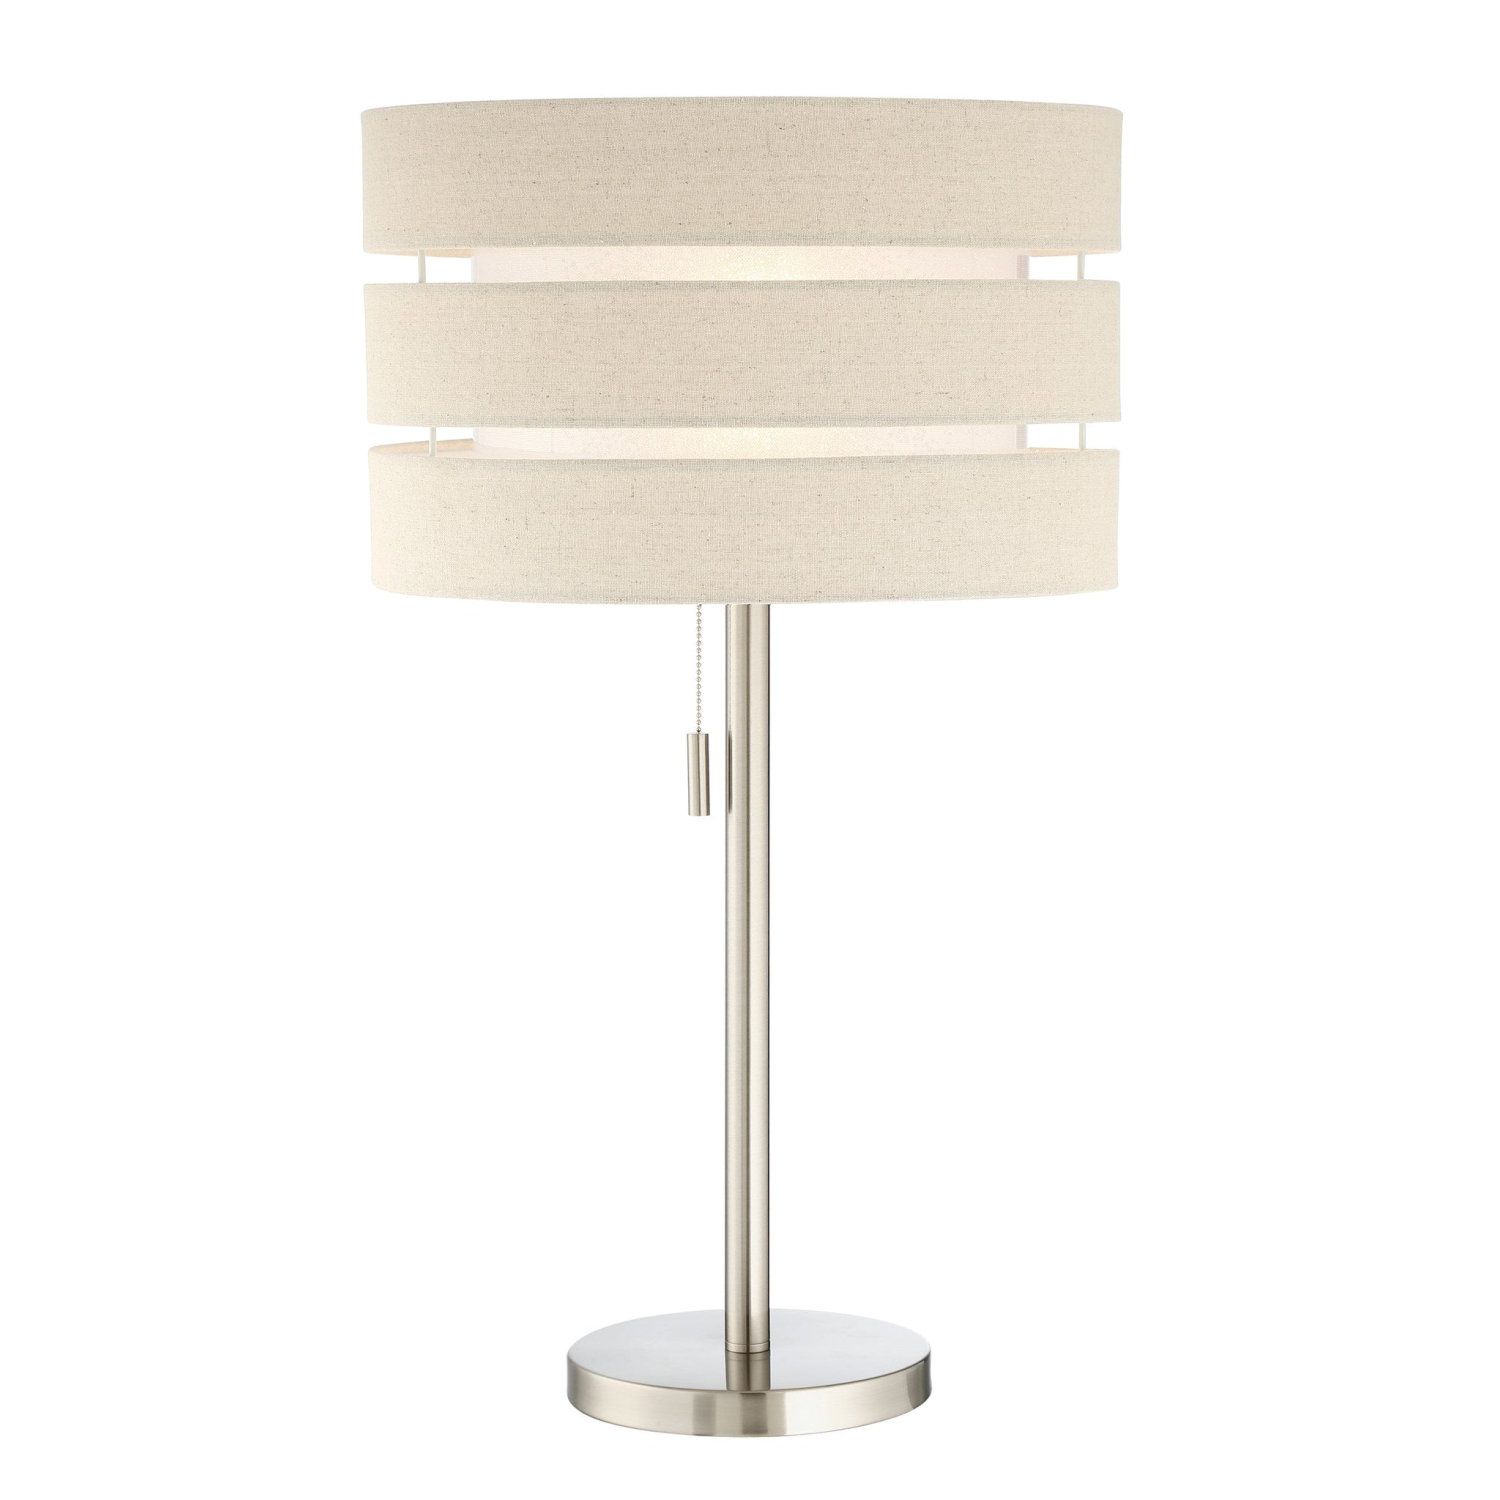 Falan Table Lamp Picture with White Background